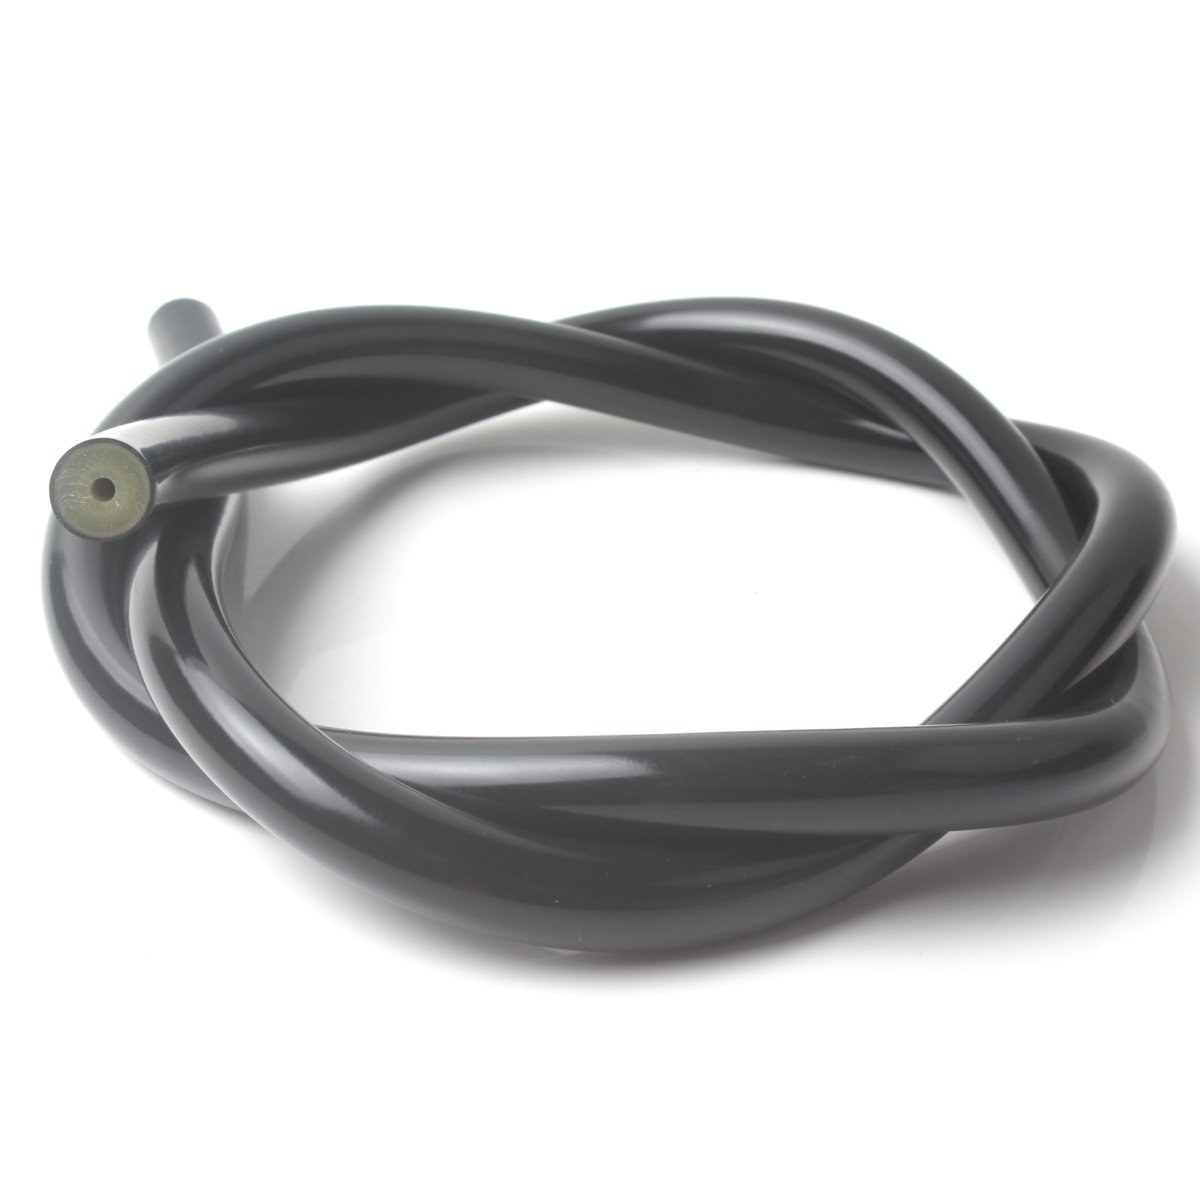 3mm*14mm Spearfishing Bungee Latex Rubber Tubing